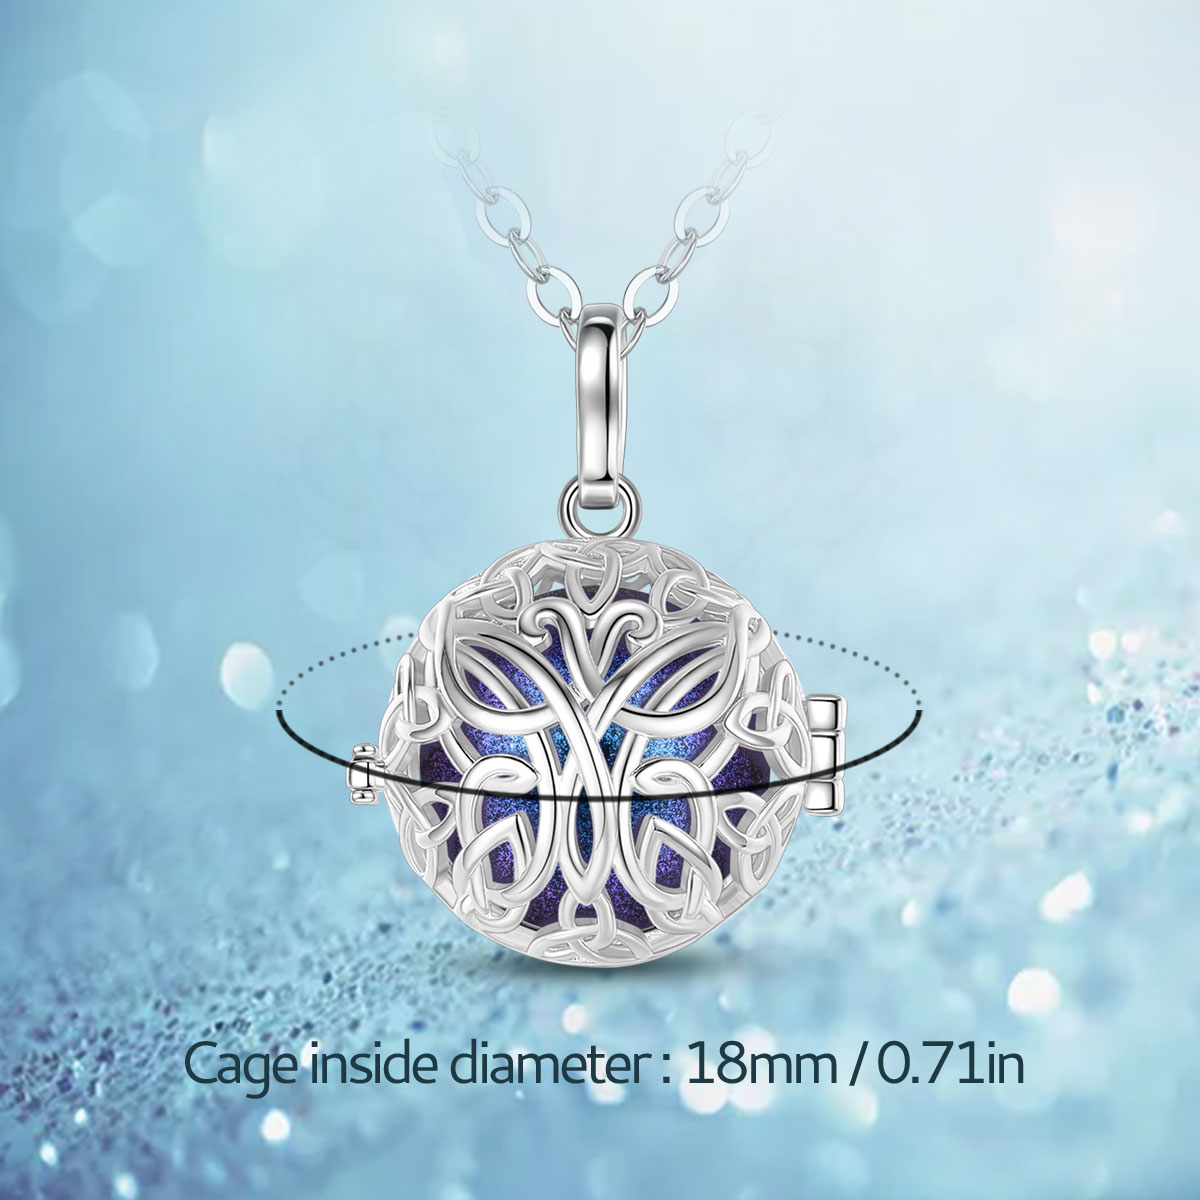 Merryshine Jewelry Wholesale Baby Jewelry Celtic Knot Angel Chime Ball Pendant Necklace